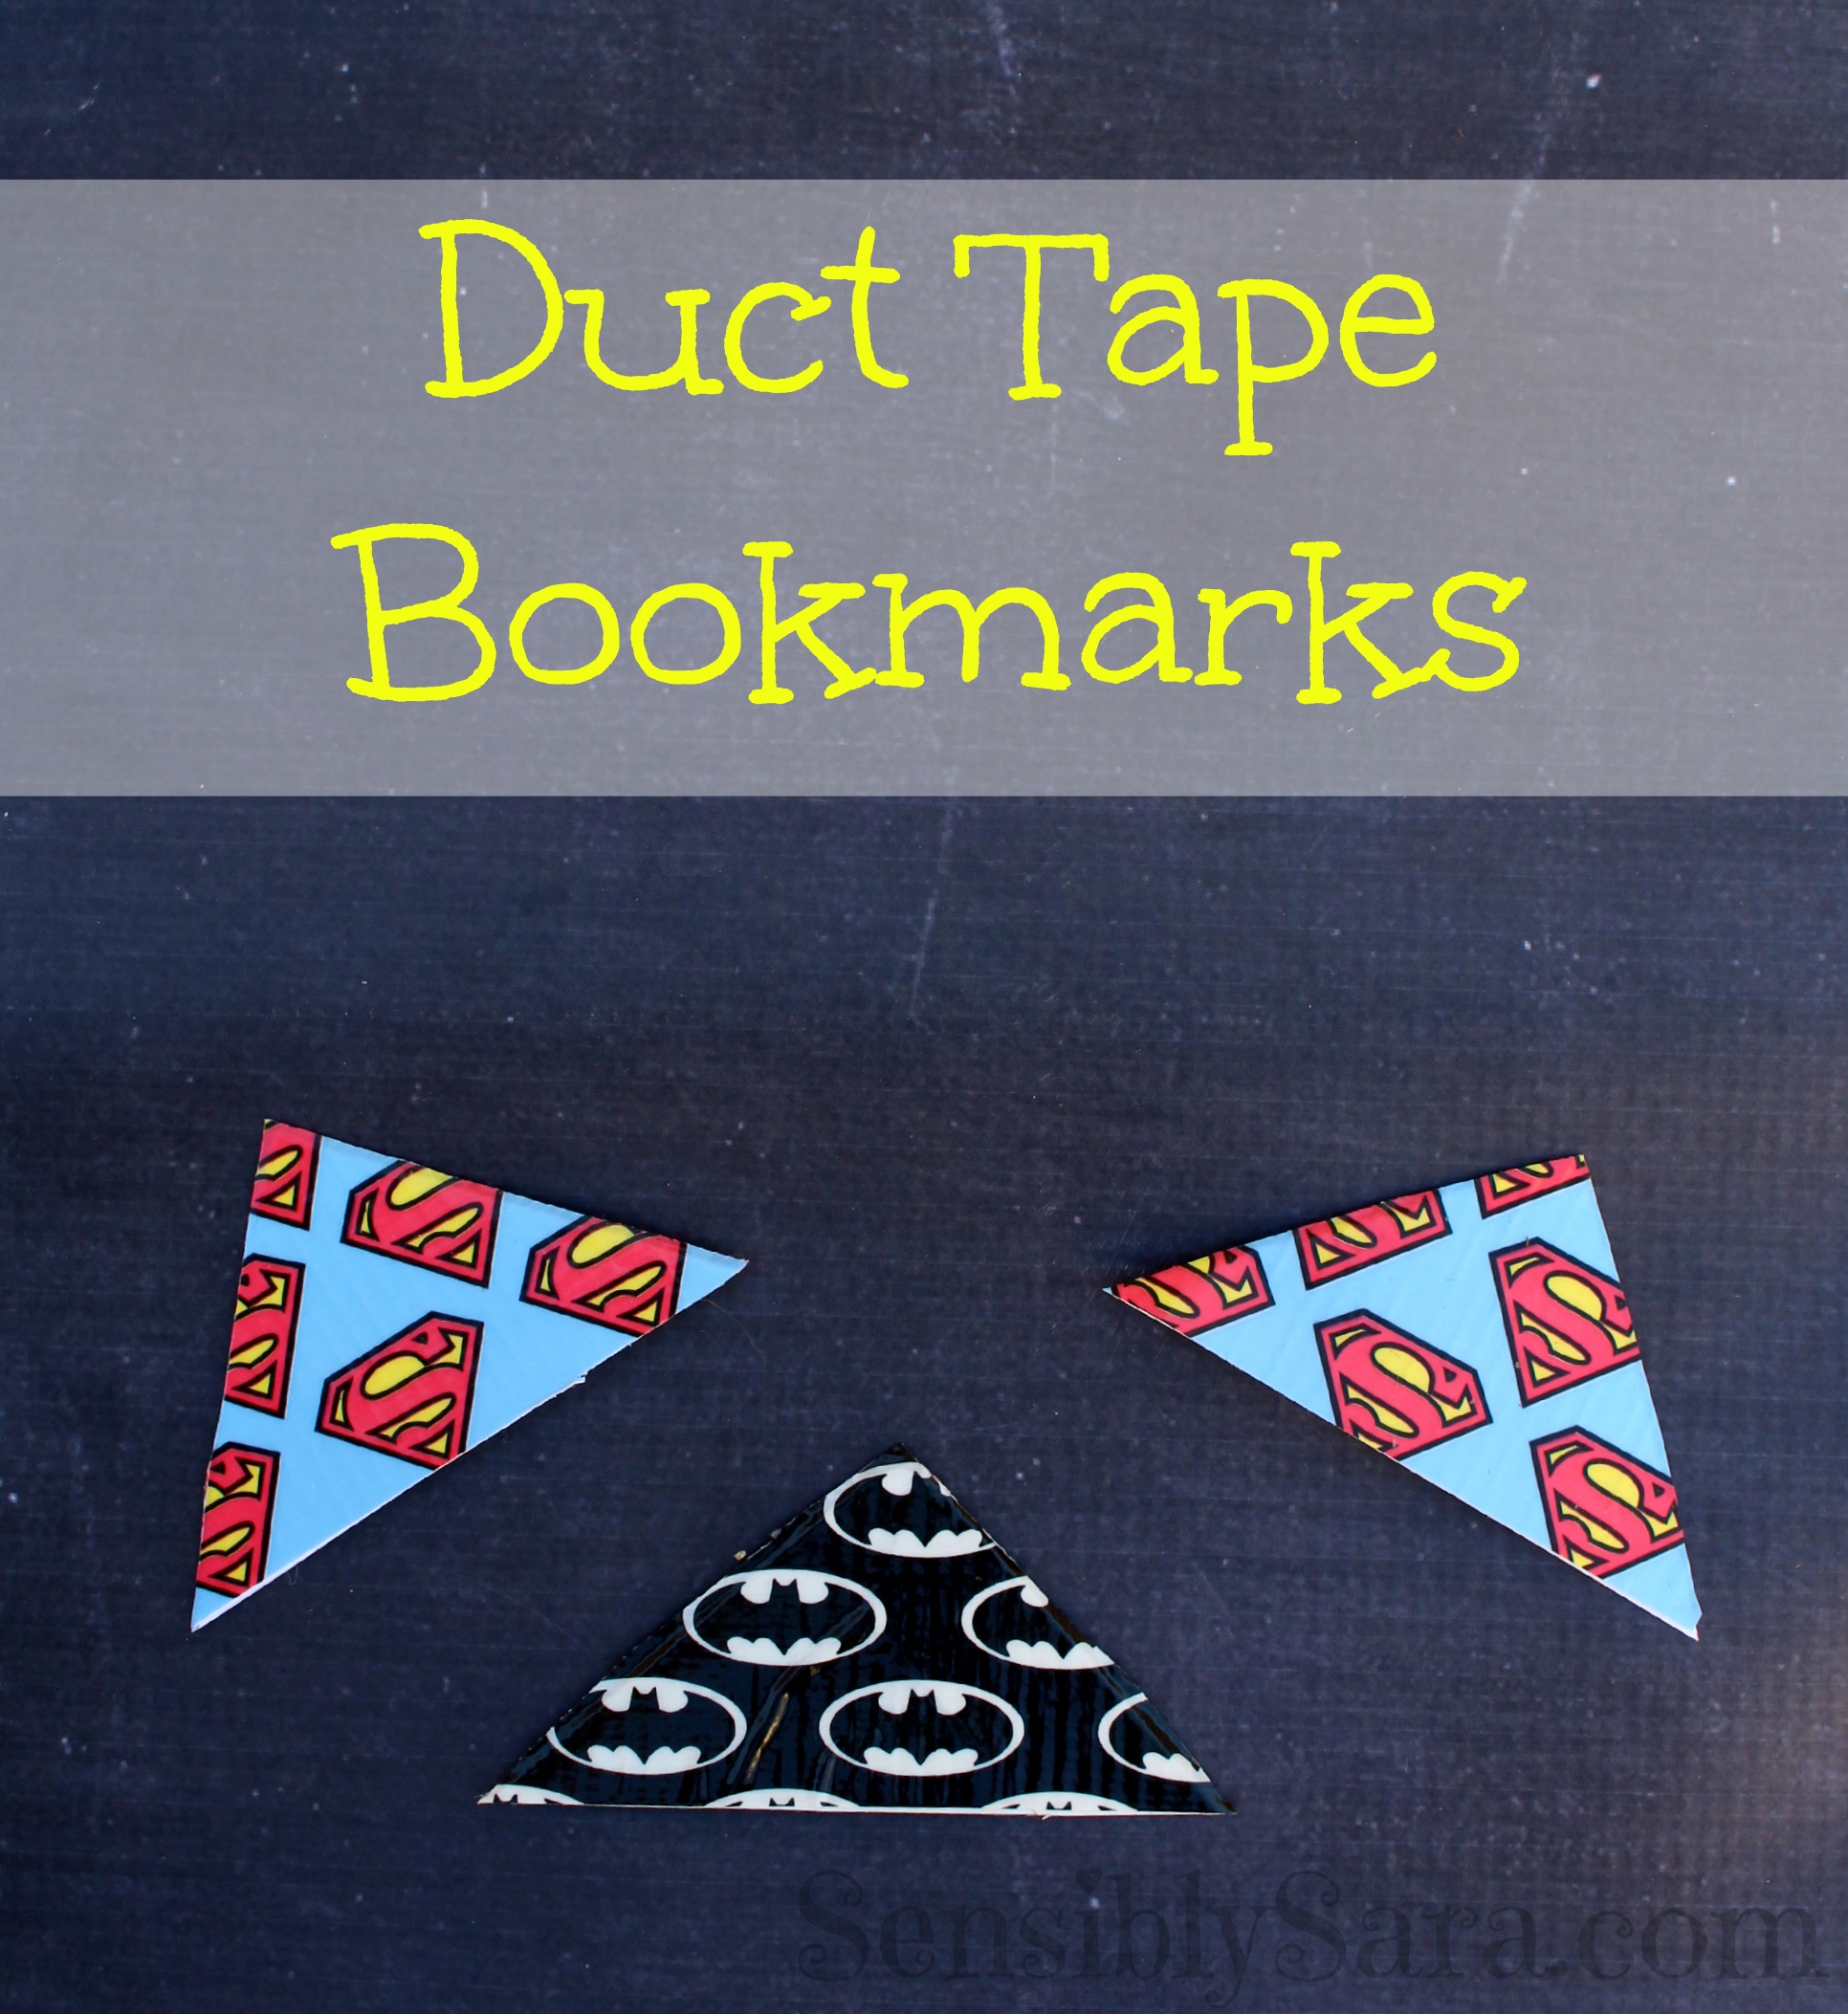 33 Awesome DIY Duct Tape Projects and Crafts